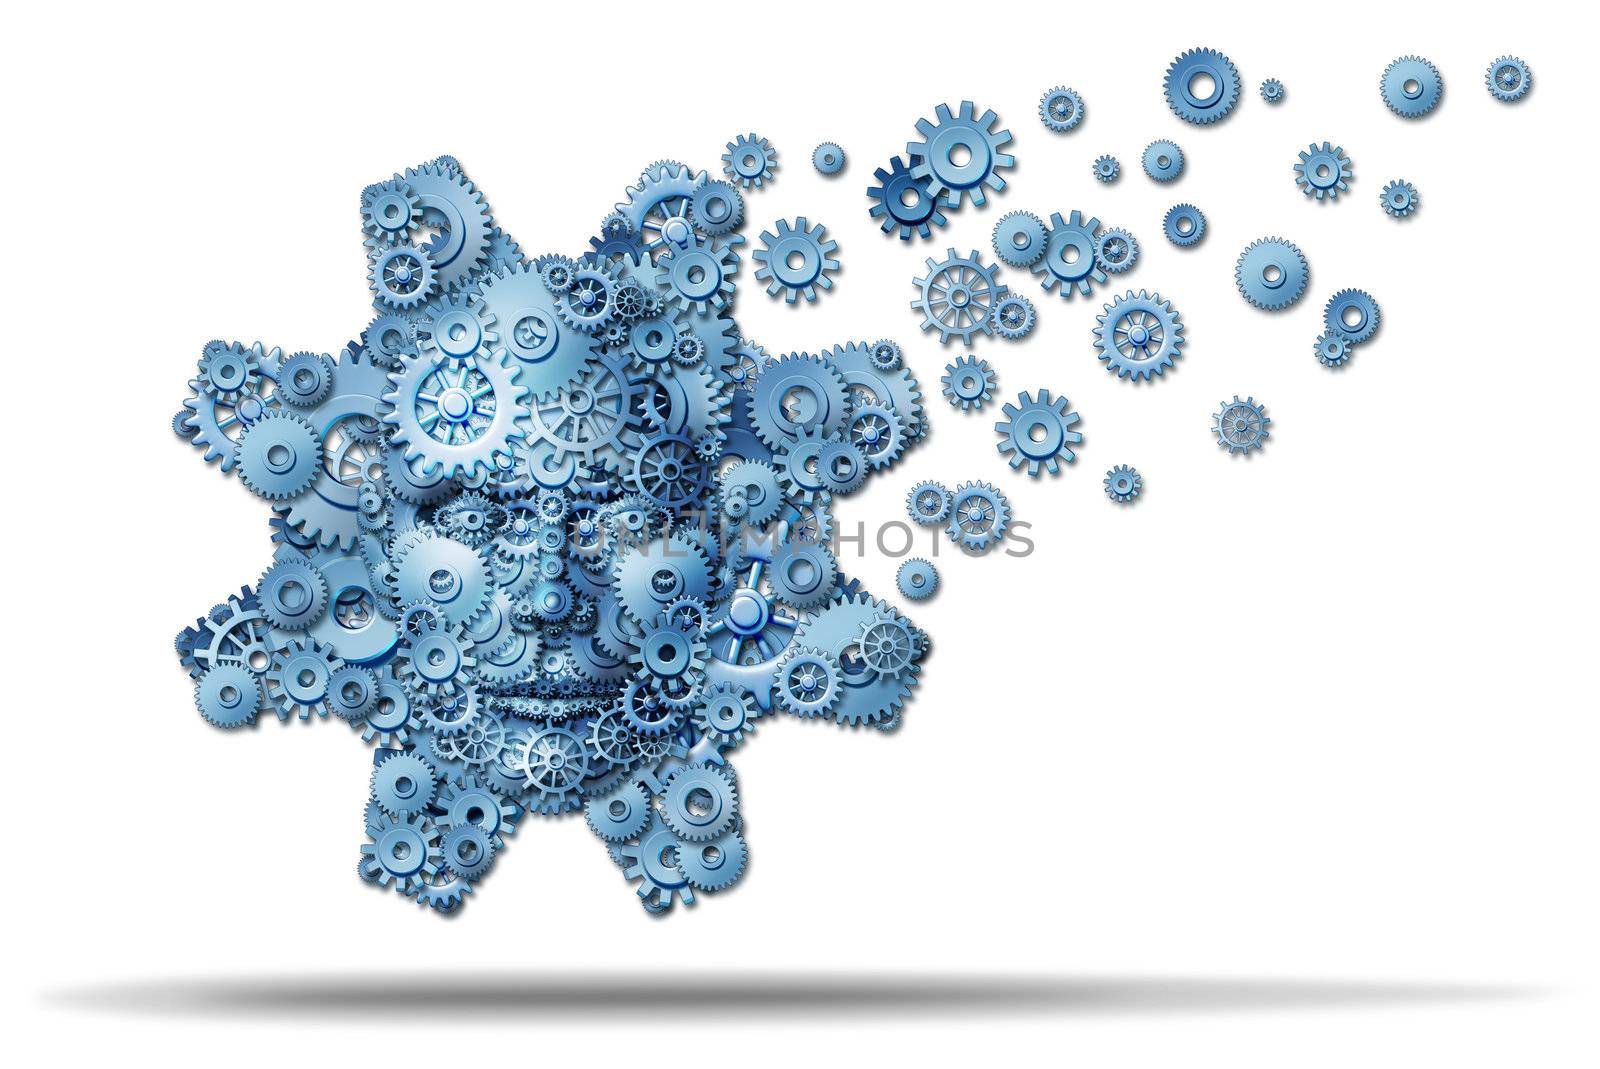 Business education and corporate training with gears and cogs shaped as a giant gear with a human face symbol spreading knowledge and teaching financial skills for career growth on a white background.